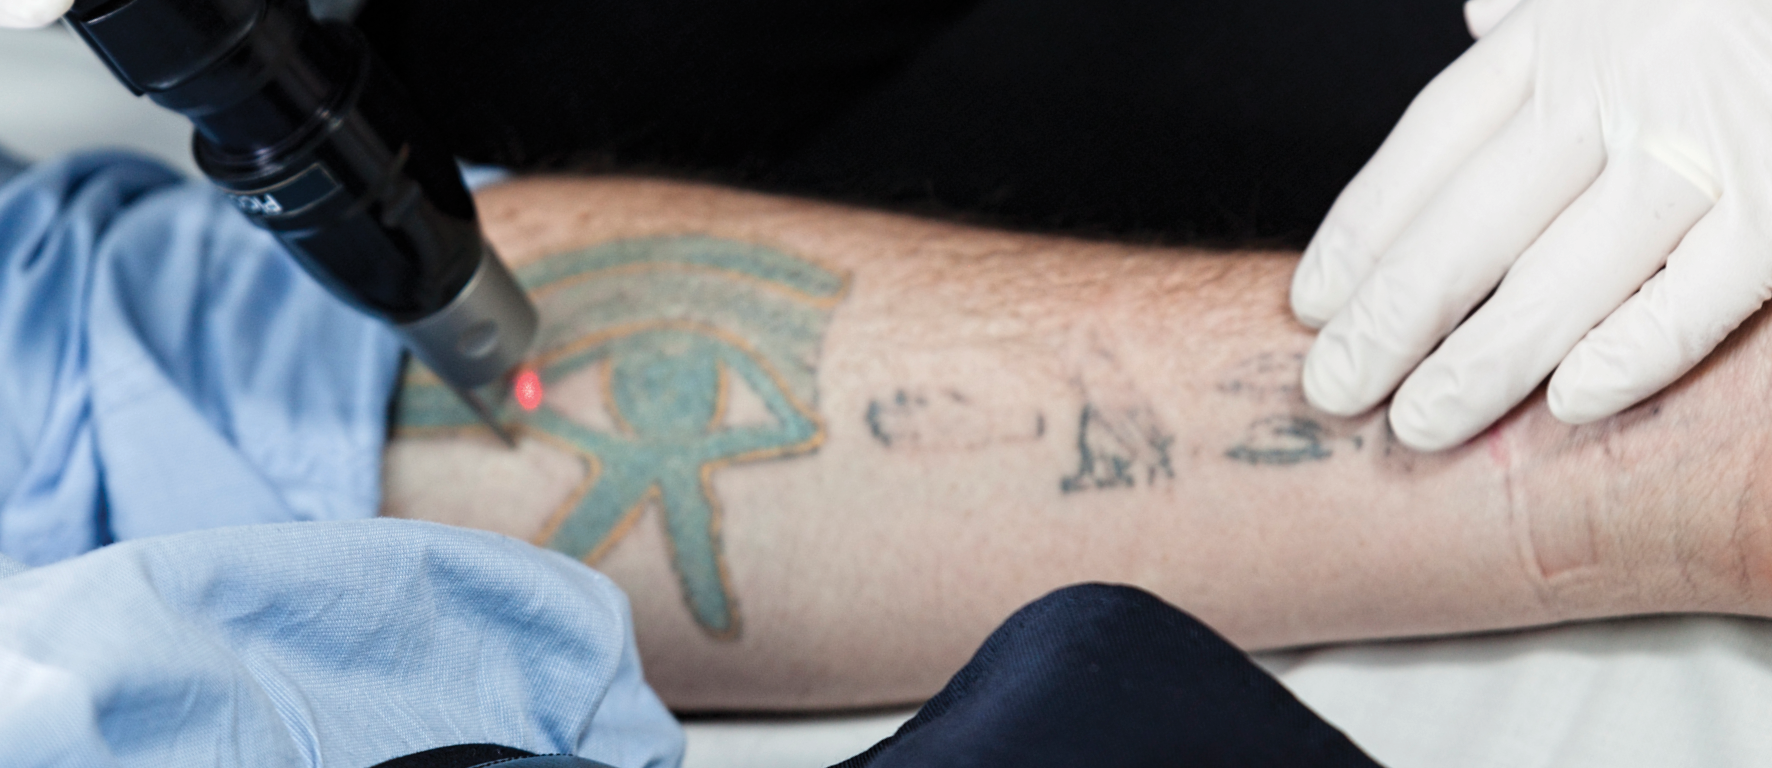 Tattoo Removal for Sensitive Areas: What You Need to Know | AllWhite Laser  | AW3®